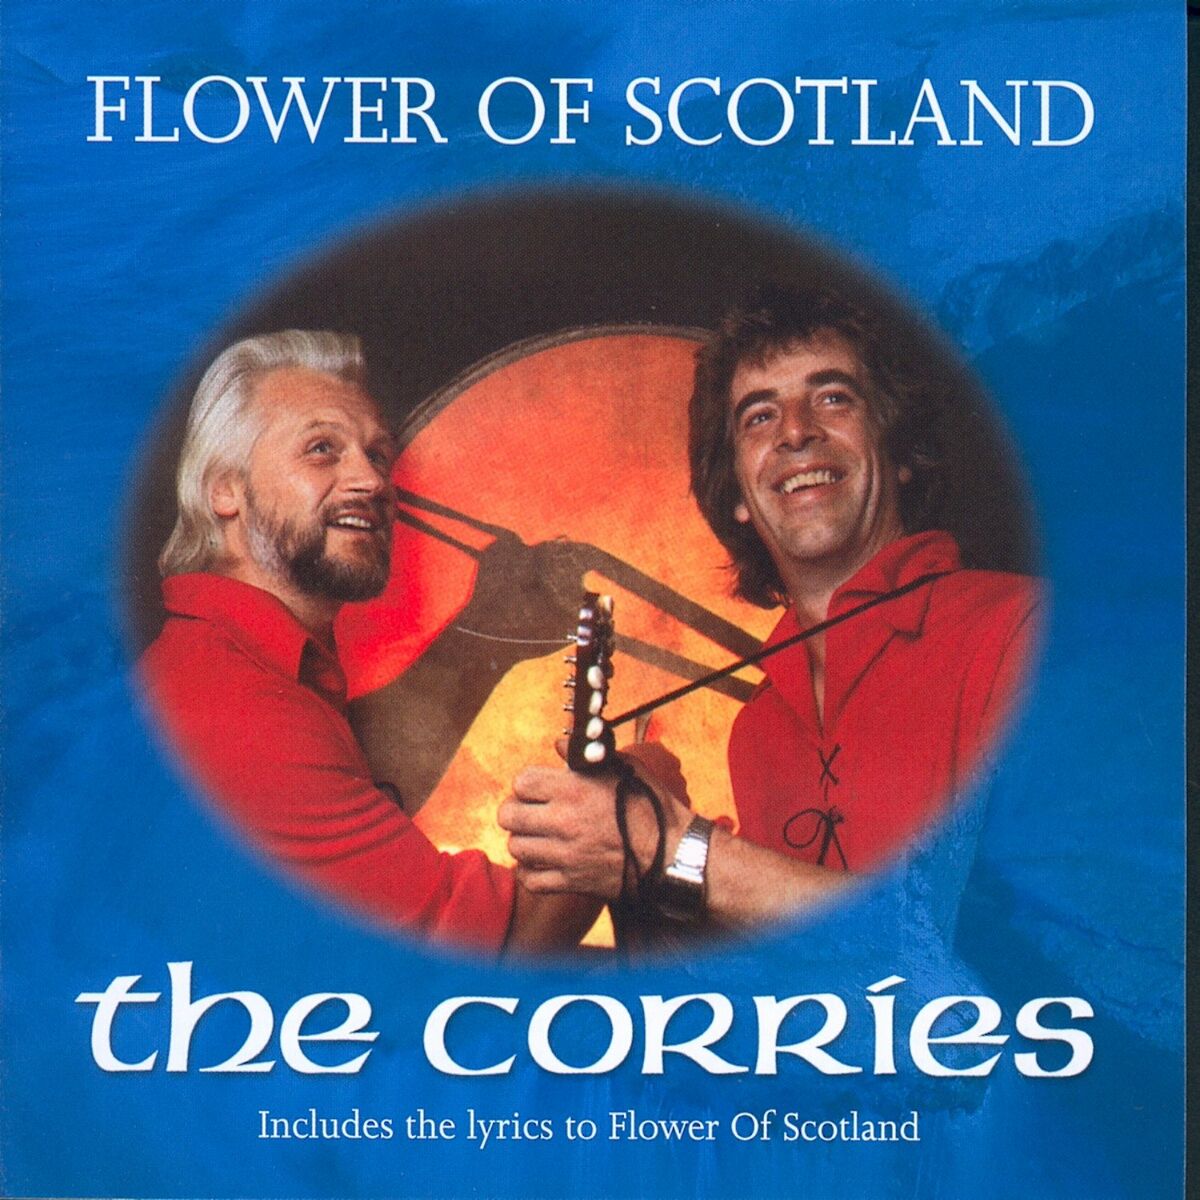 The Corries – 15 albums